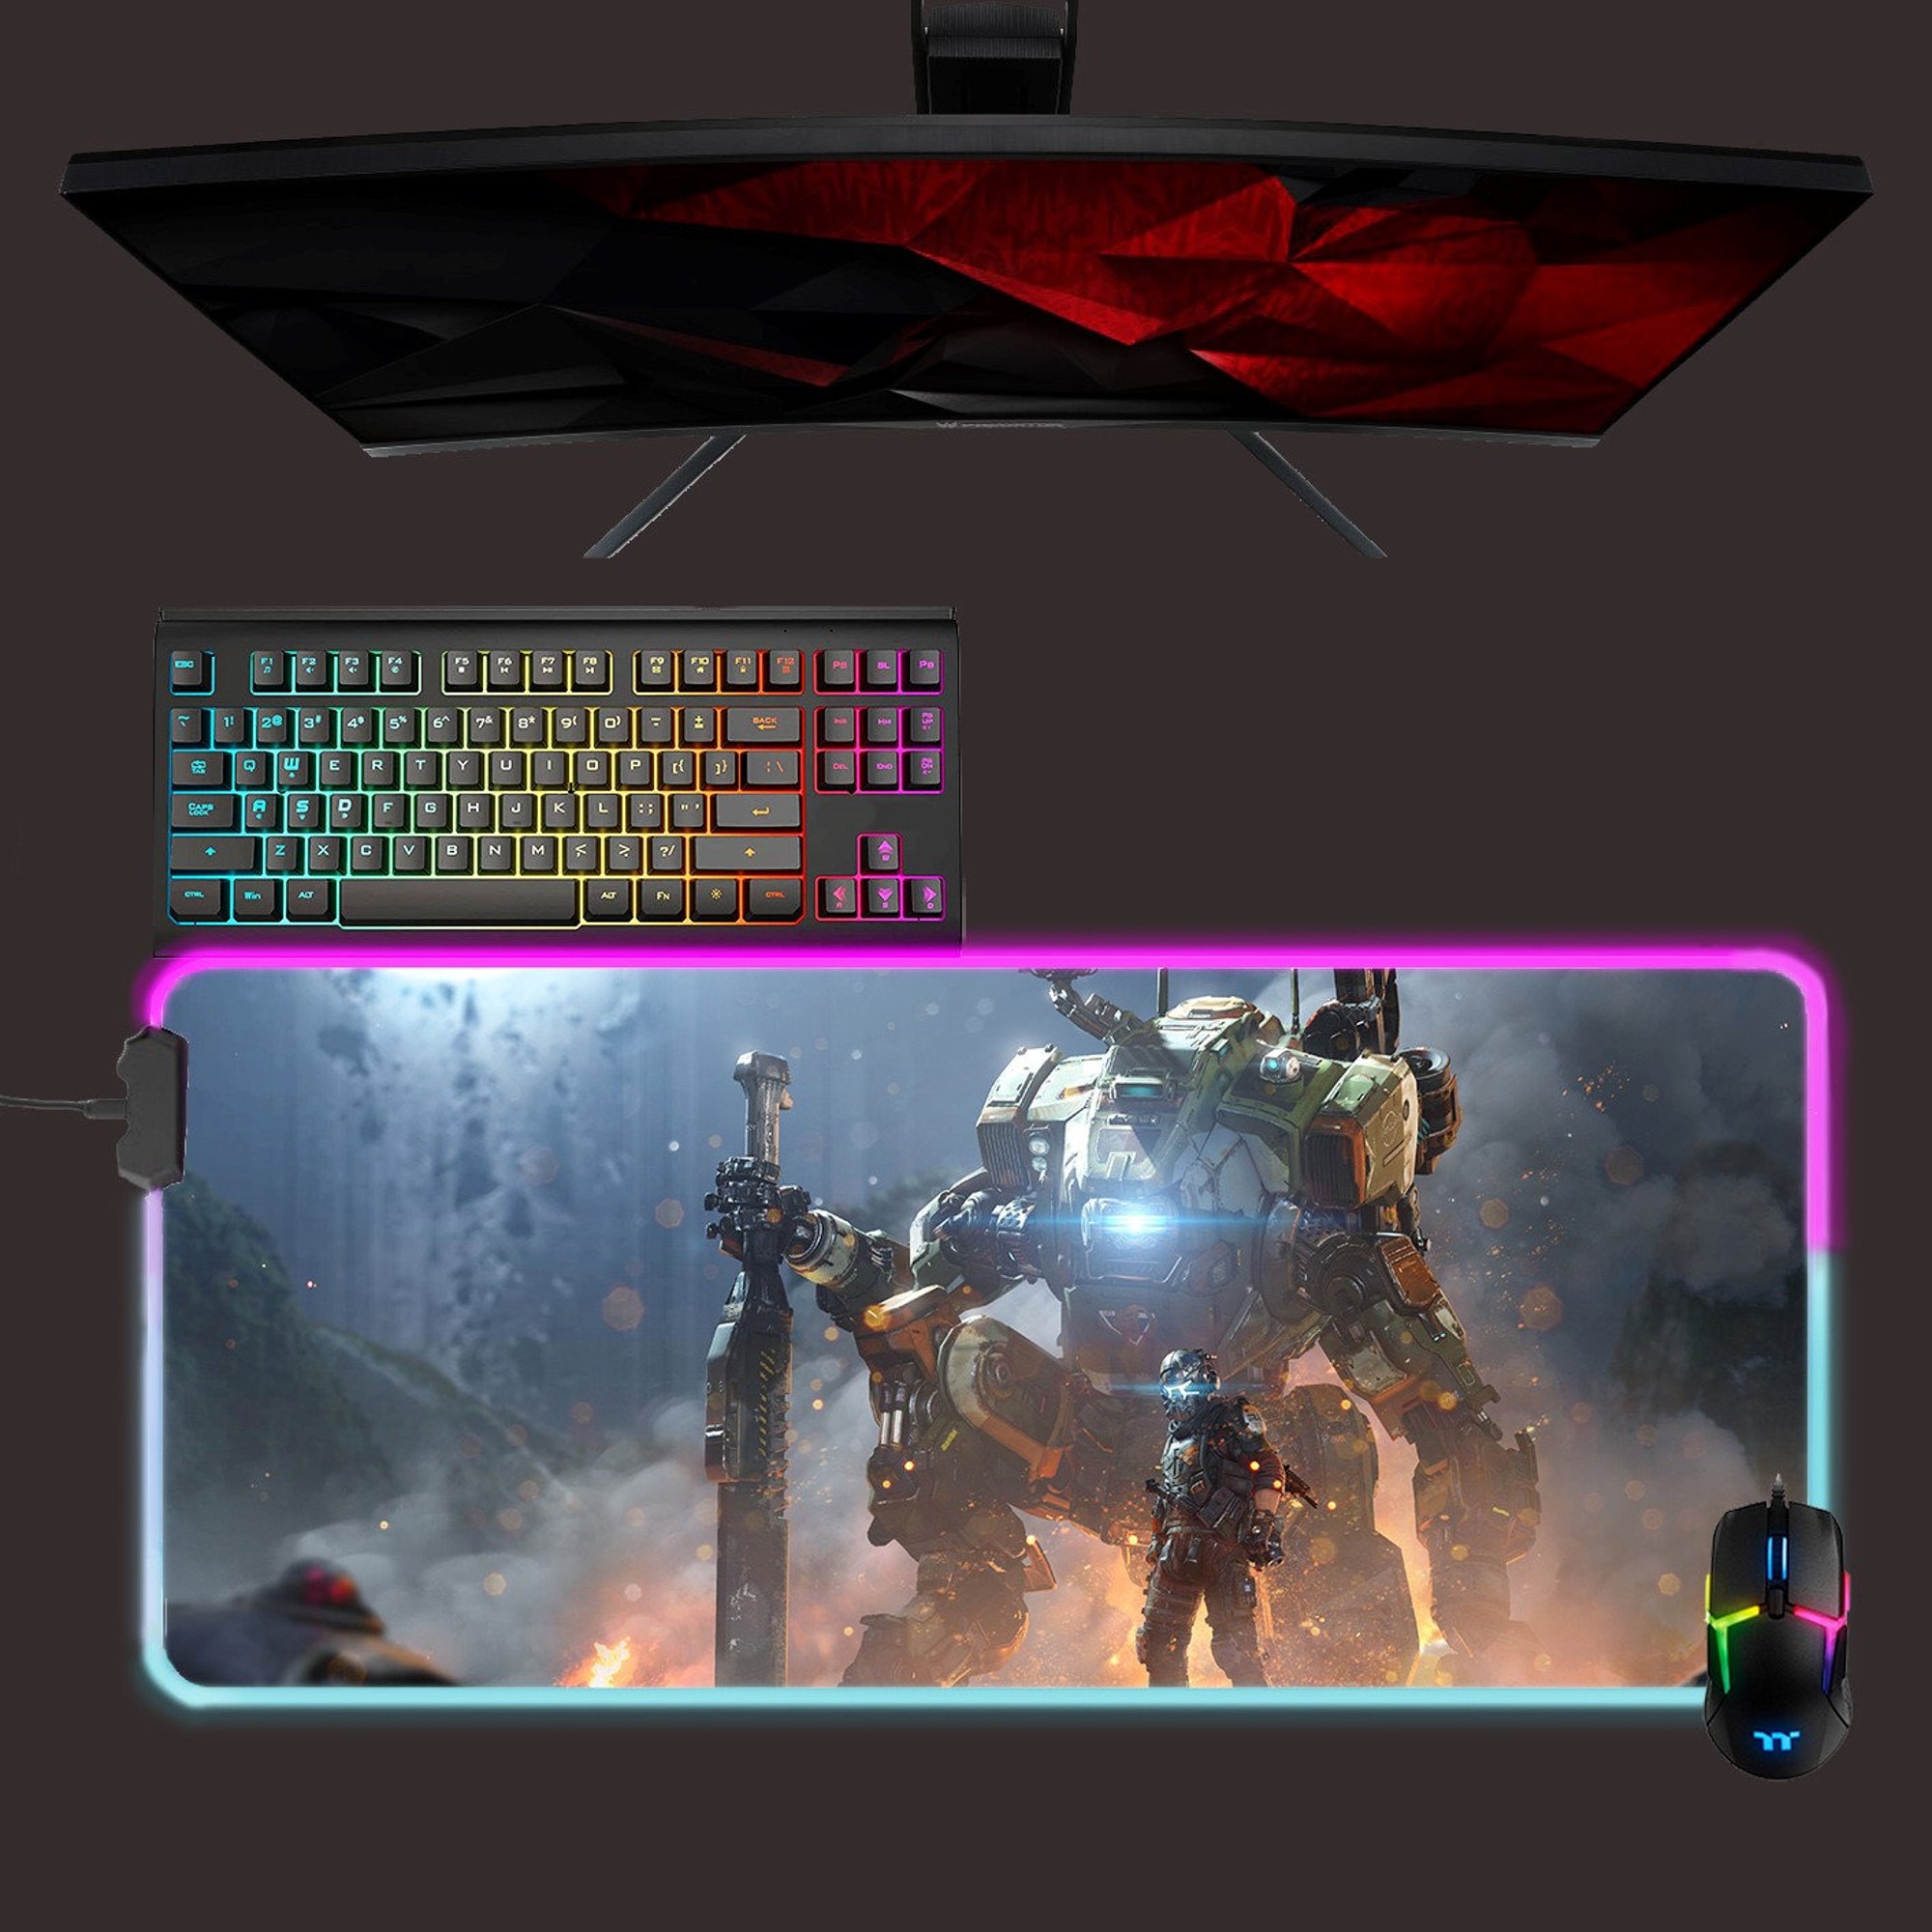 Titanfall led mouse mat, rgb mouse pad, gaming mouse pad, gift for gamer